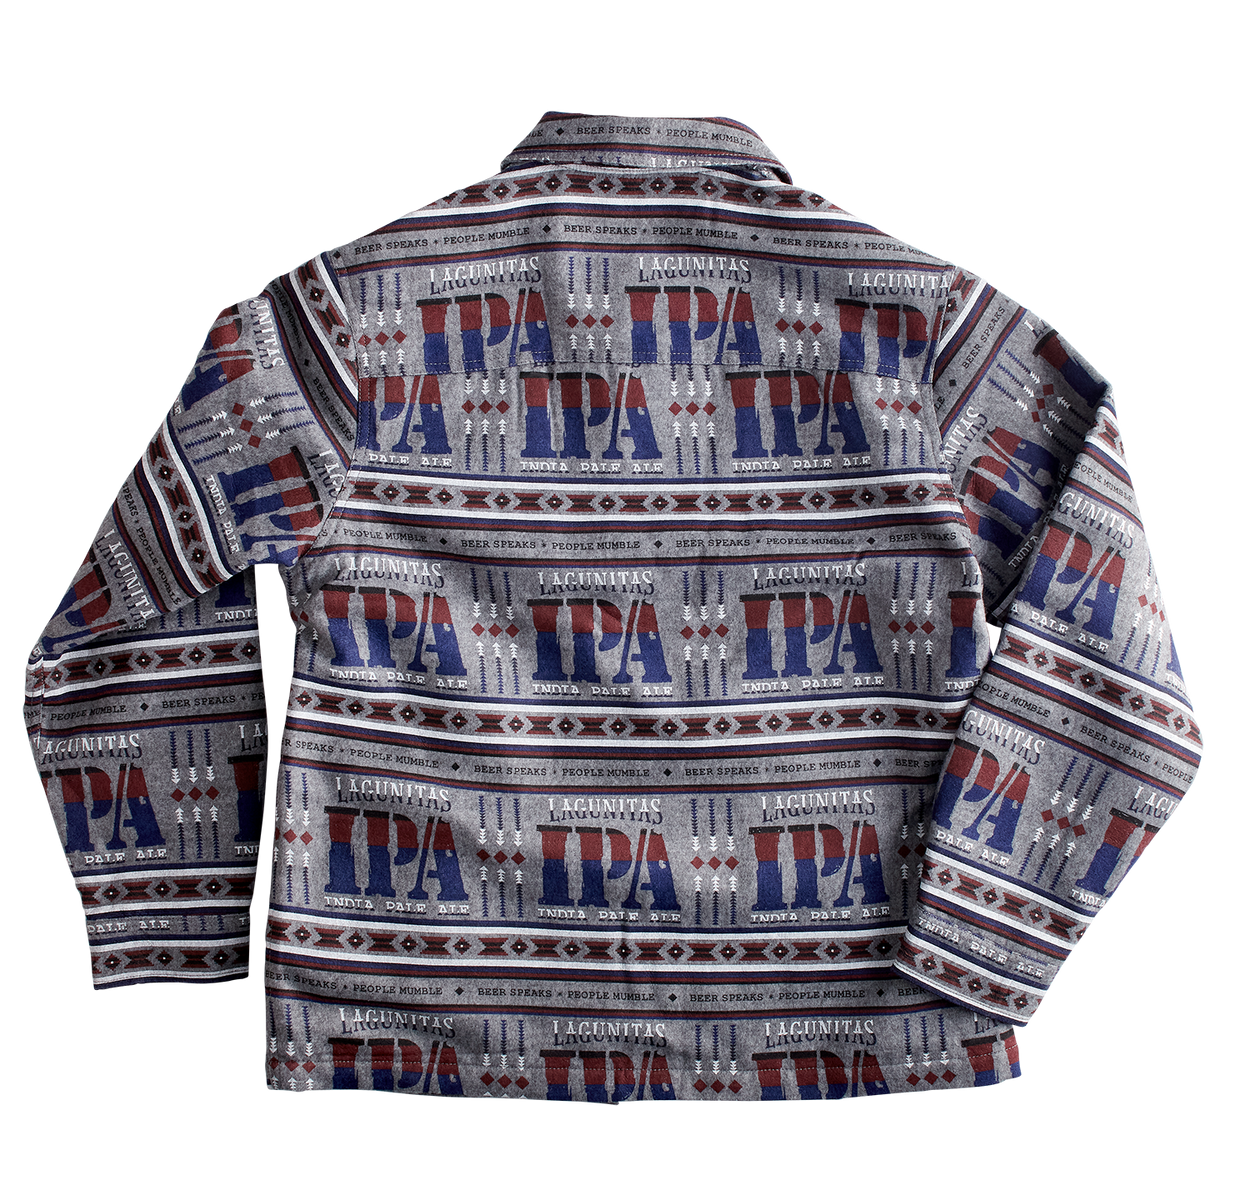 “A unique and stylish jacket featuring a captivating canyon print. Made with a Poly/Rayon shell, it offers a comfortable fit. The jacket includes a patch pocket with a pen slot, lined hand pockets, and an interior pocket. Adorned with Lagunitas metal snaps, this jacket is perfect for beer enthusiasts seeking trendy and functional outerwear.”